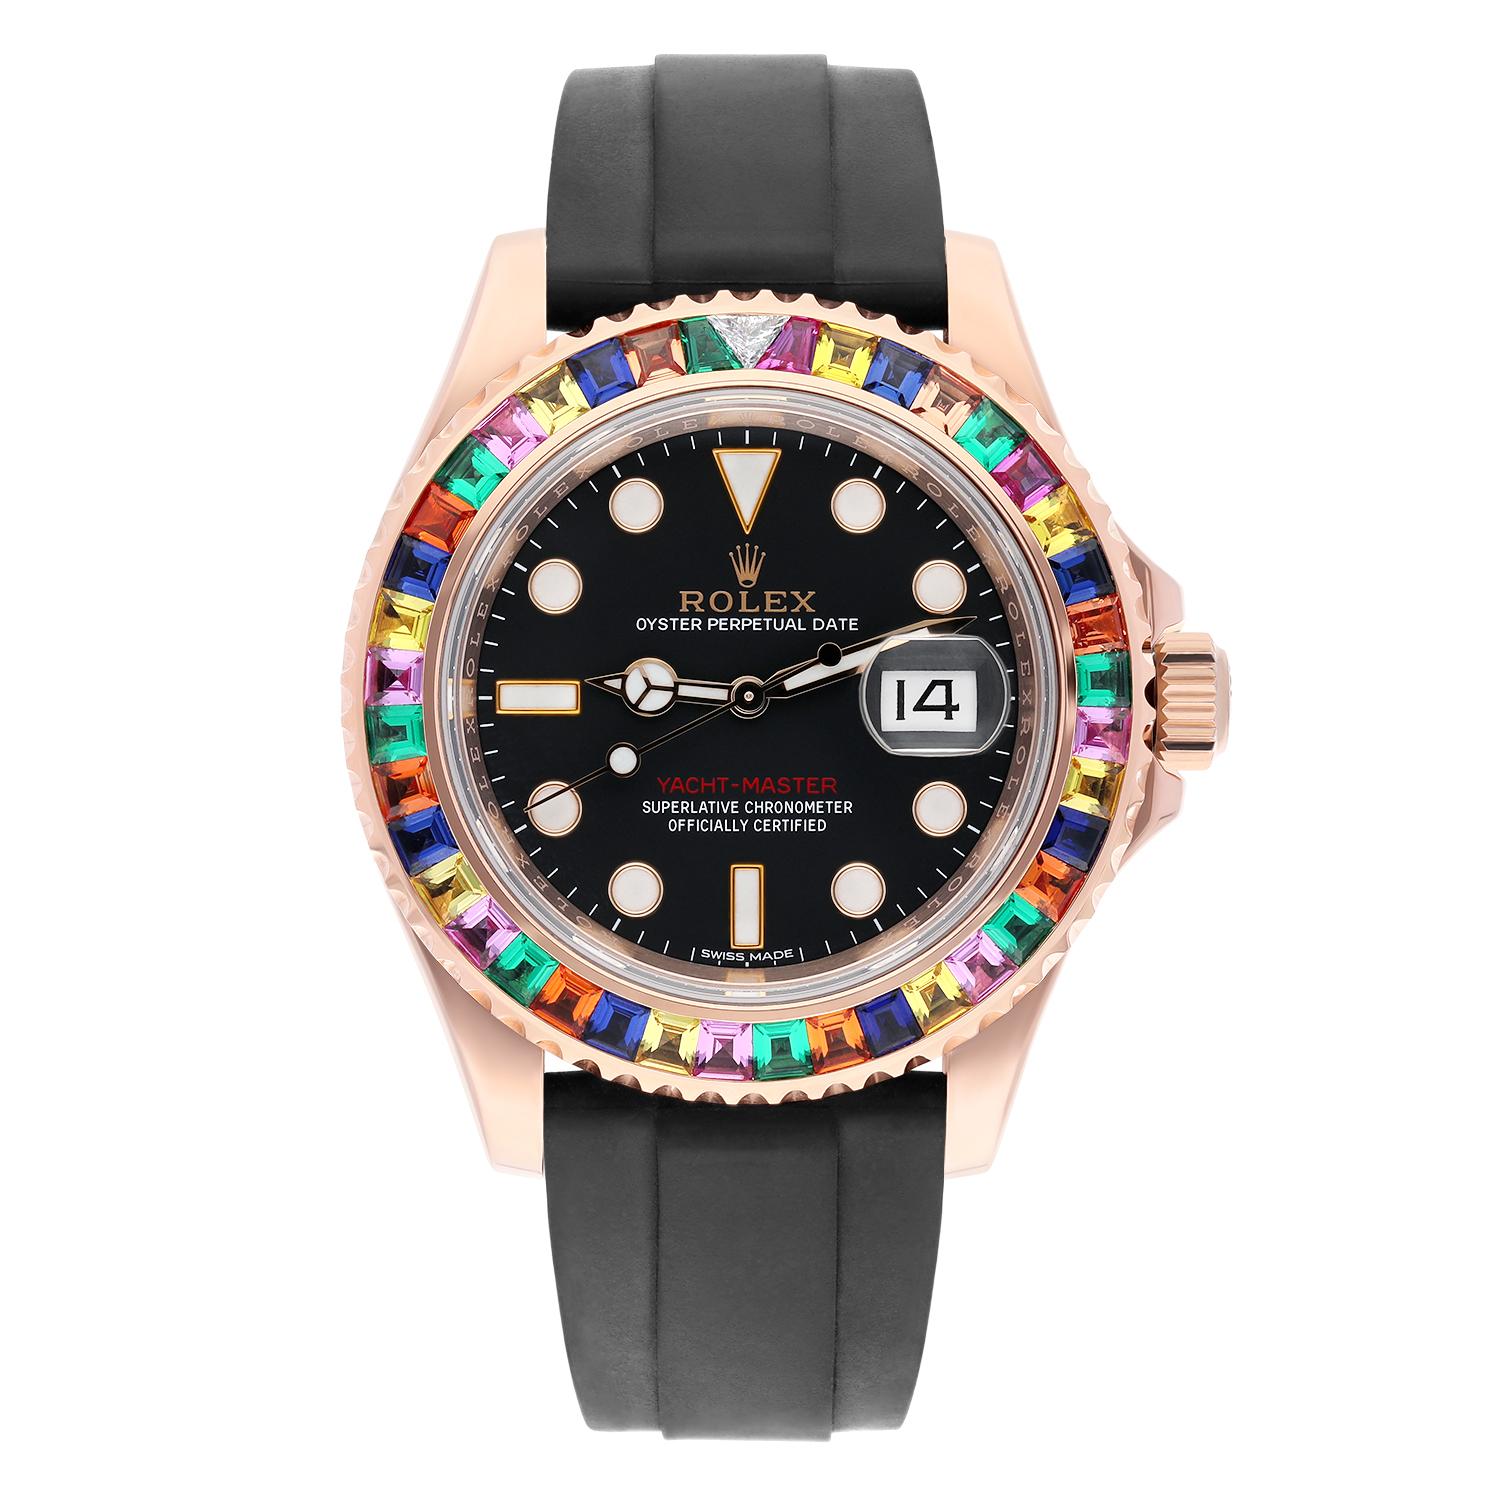 This Rolex Yacht-Master wristwatch is a luxurious timepiece that exudes elegance and style. Crafted from 18K rose gold, it features a polished case finish and a bidirectional rotating bezel custom set with semi precious gemstones that perfectly